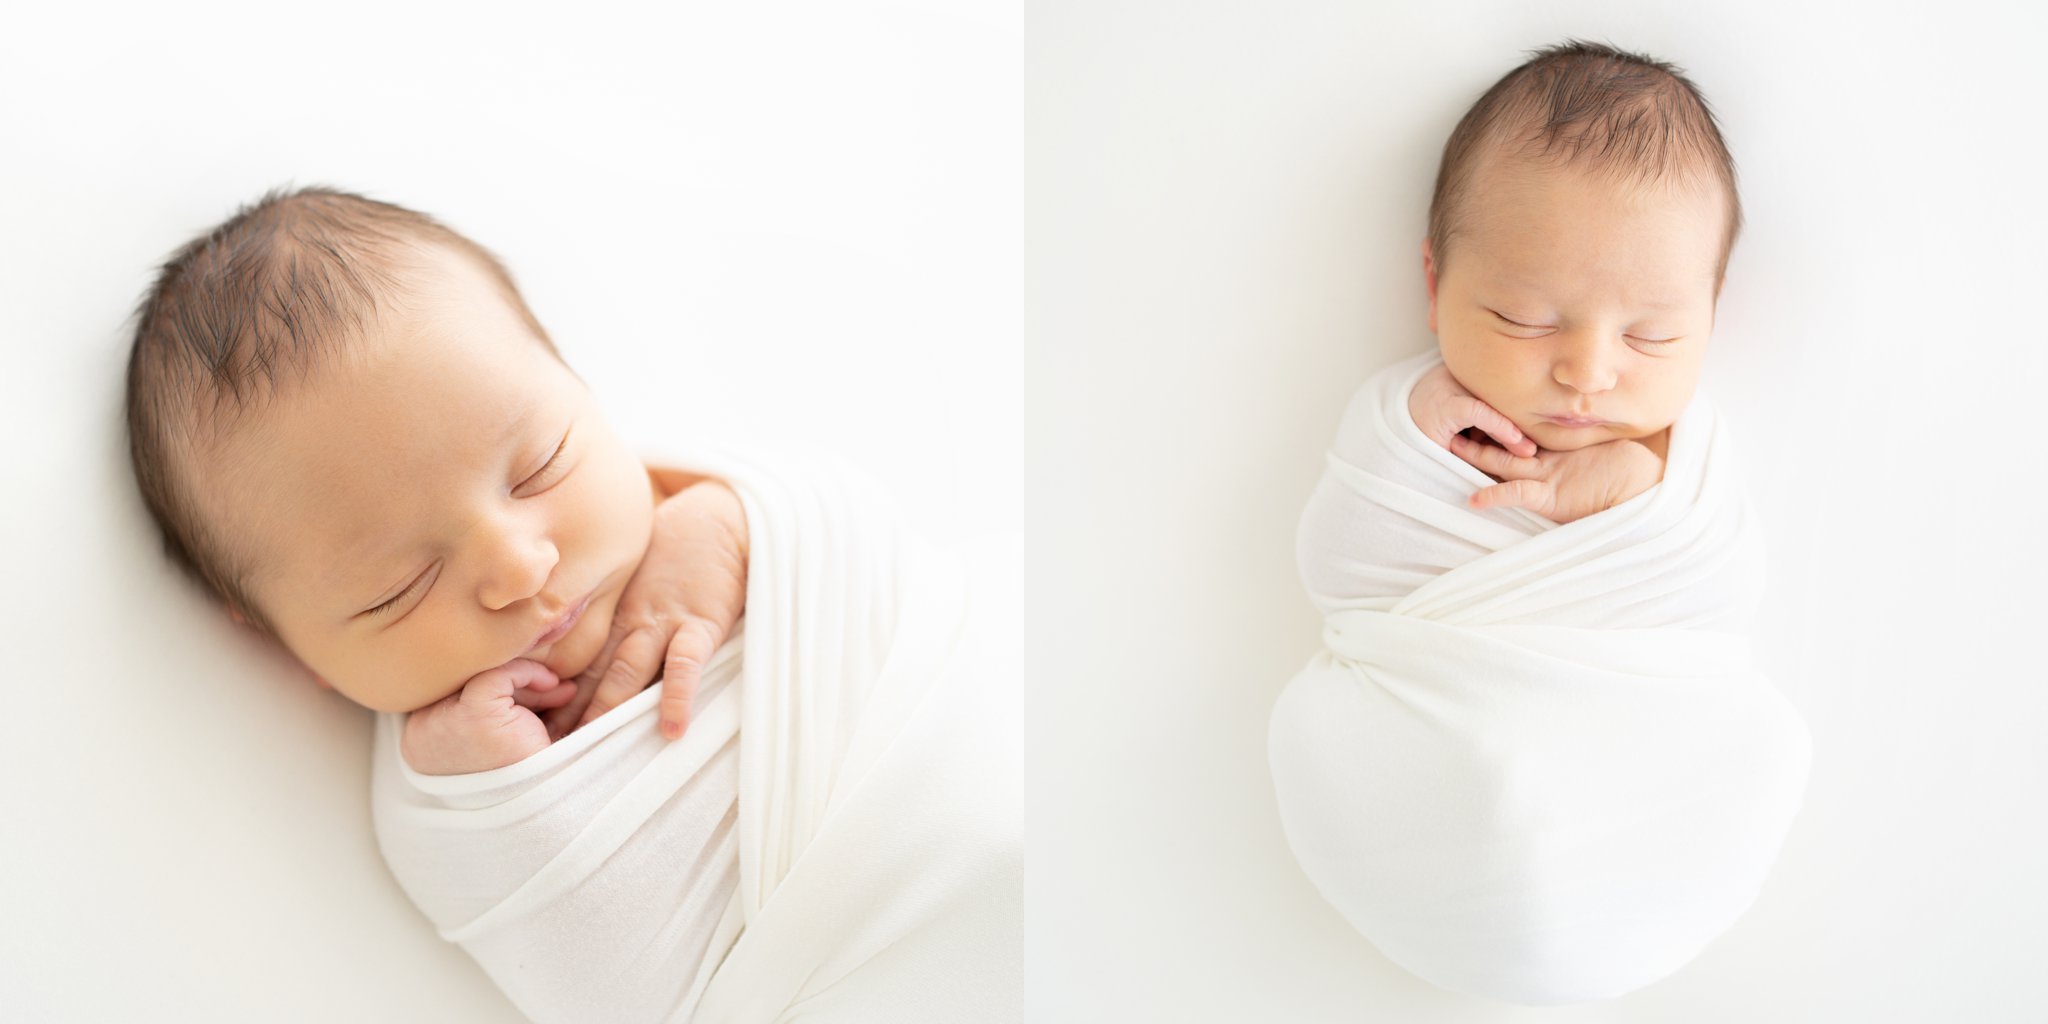 10 day old newborn baby posed and curled up asleep being photographed